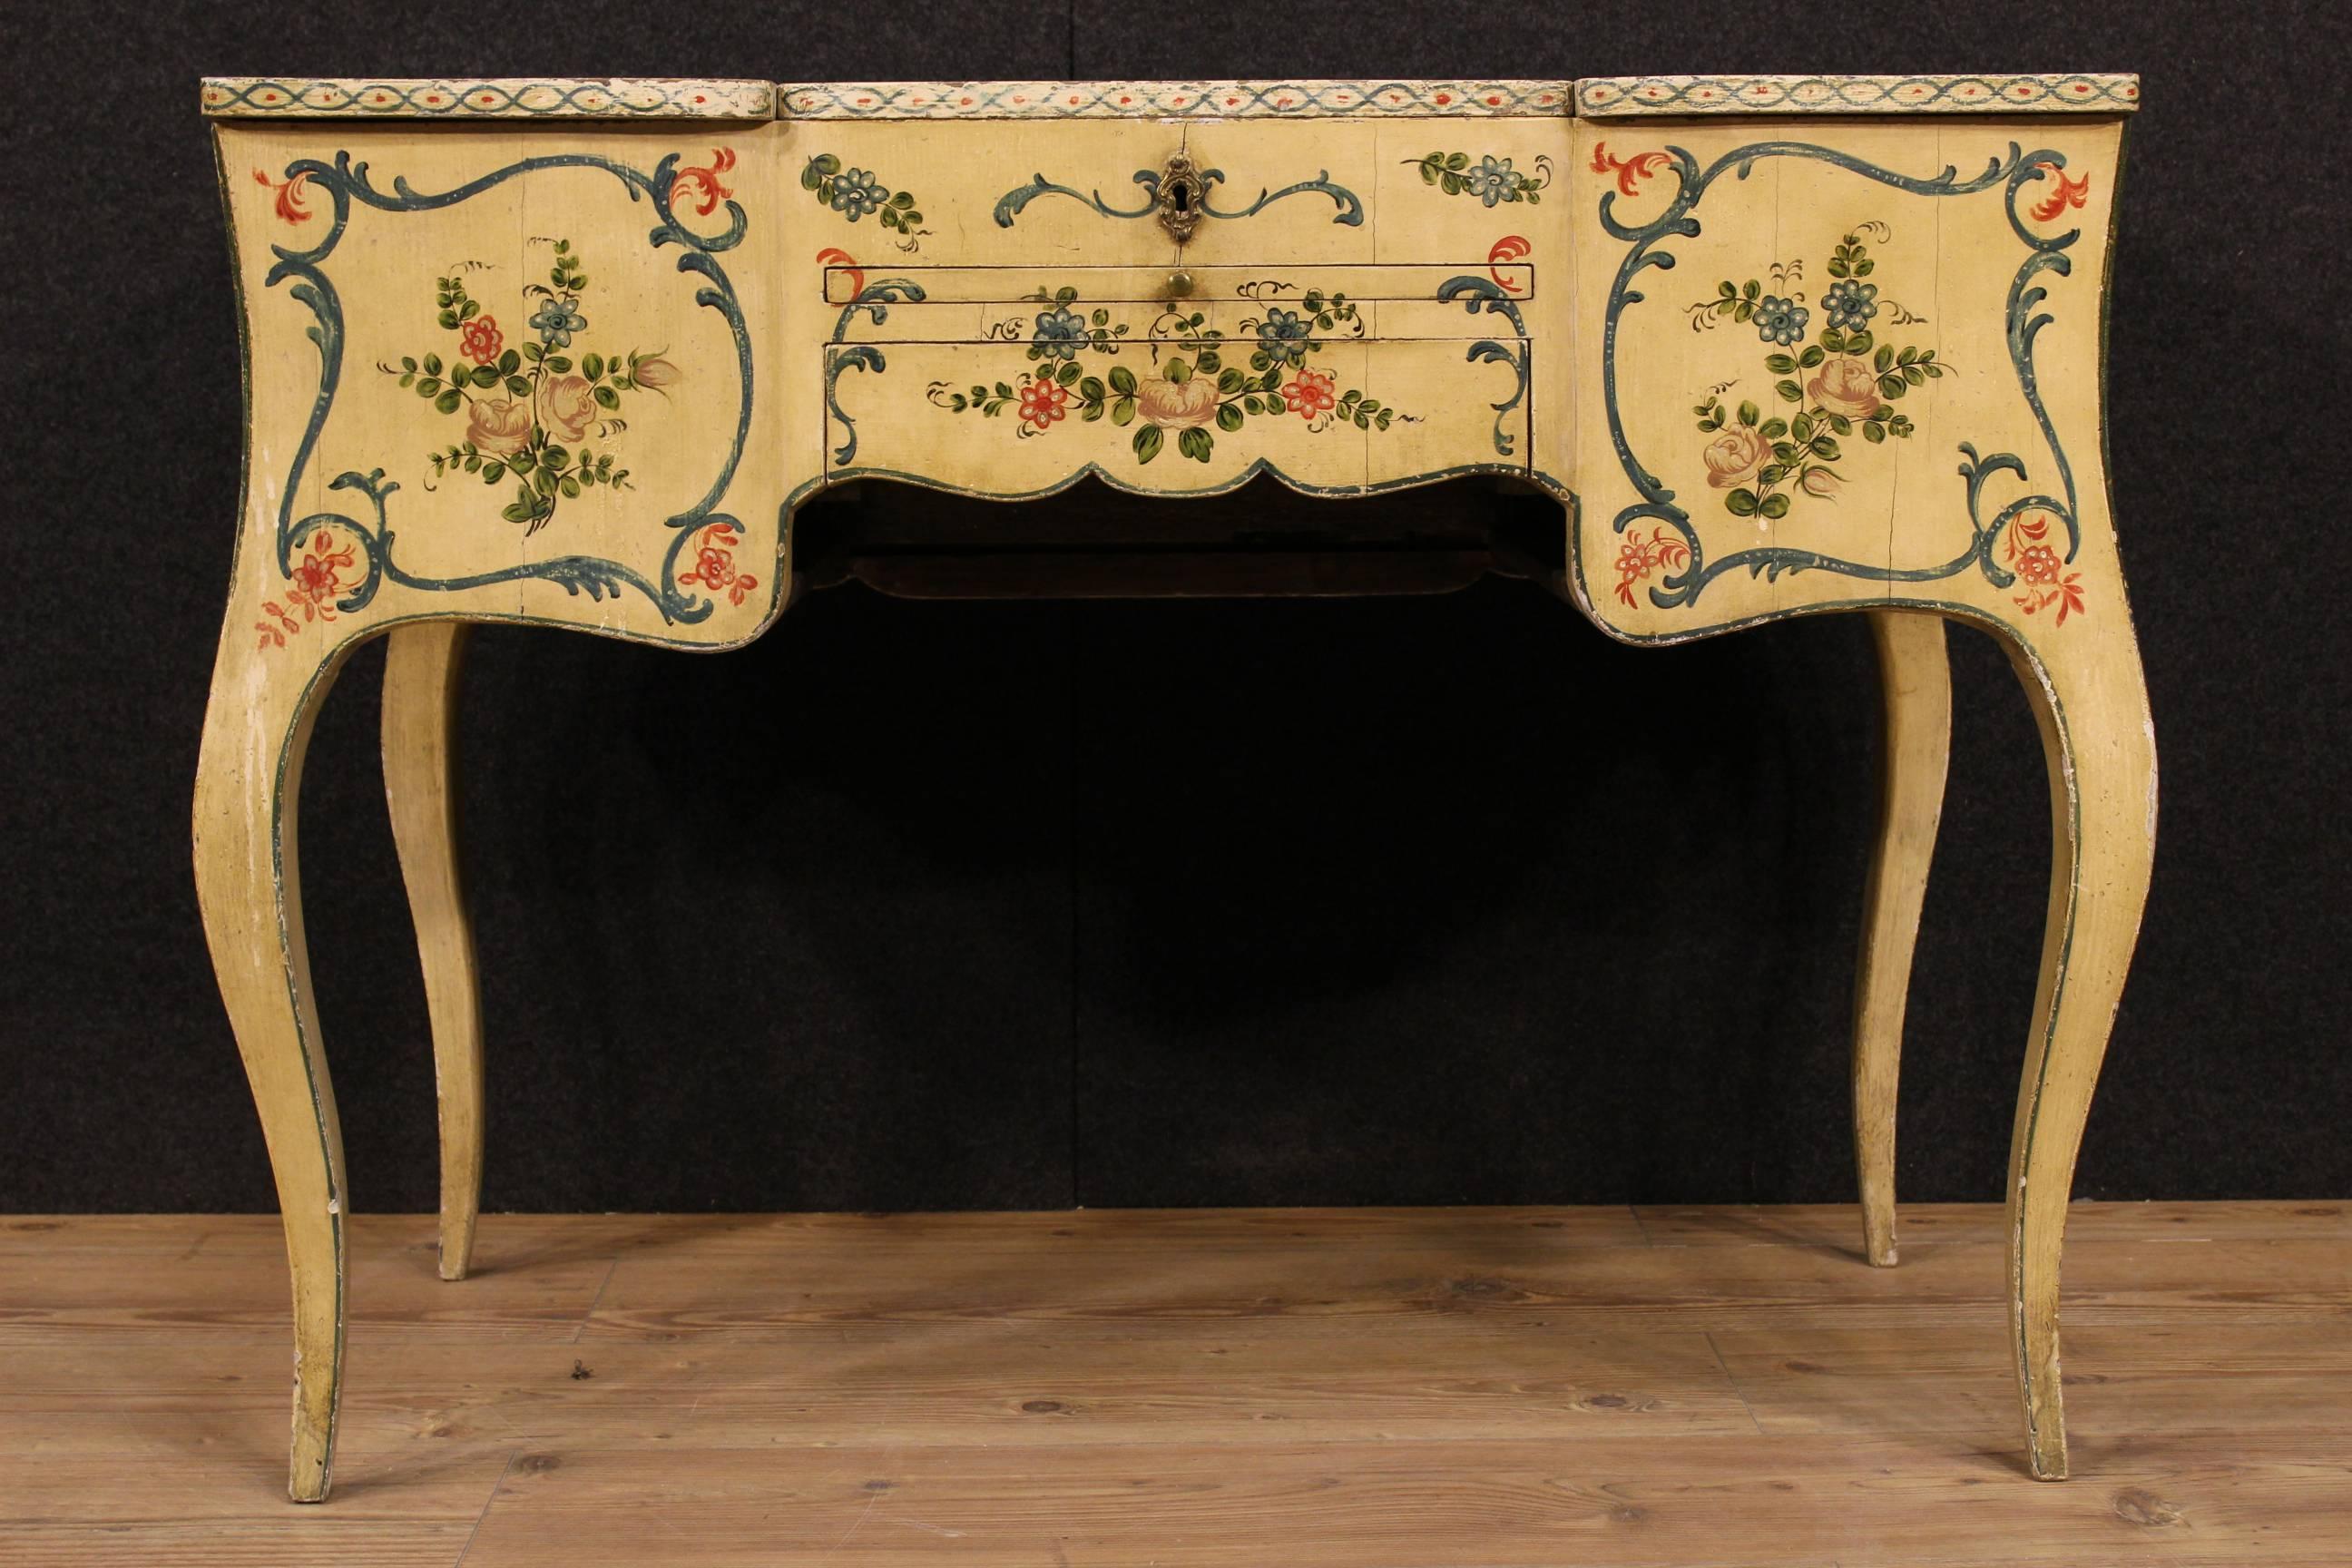 French dressing table of the late 19th century. Furniture in richly lacquered and painted wood with floral and animal decorations. Dressing table equipped with an external drawer and pull-out writing surface of good service. Top hiding three